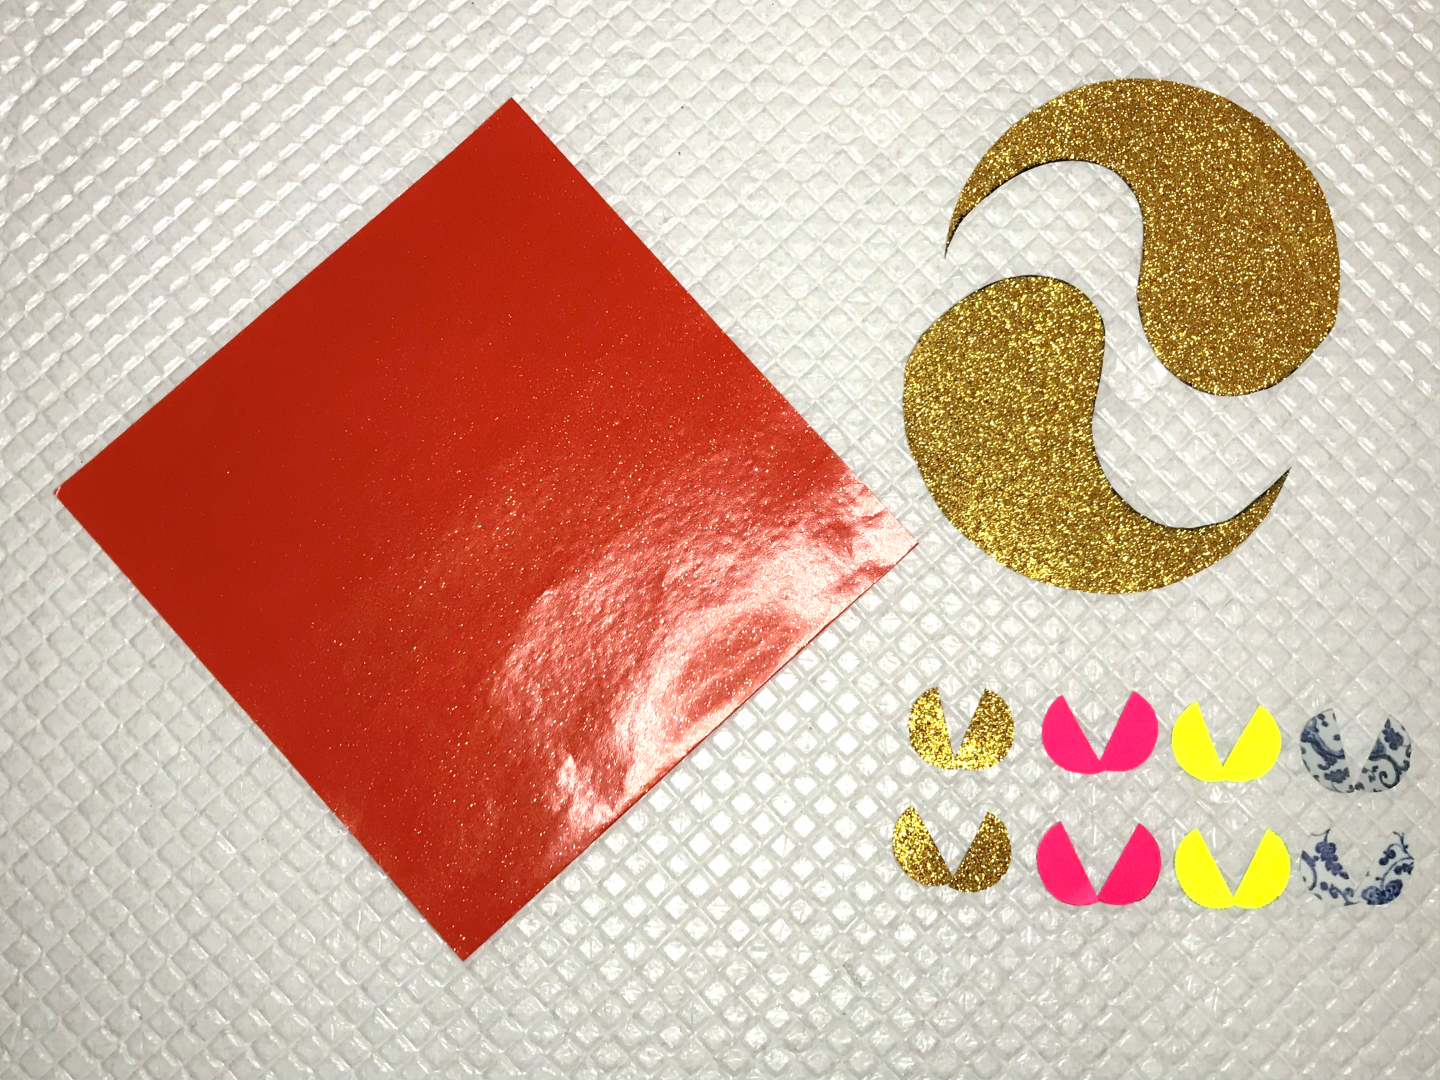 A square piece of red paper. Two pieces of gold paper cut into ying-yang shapes (or teardrops). Eight small circles cut almost in half.